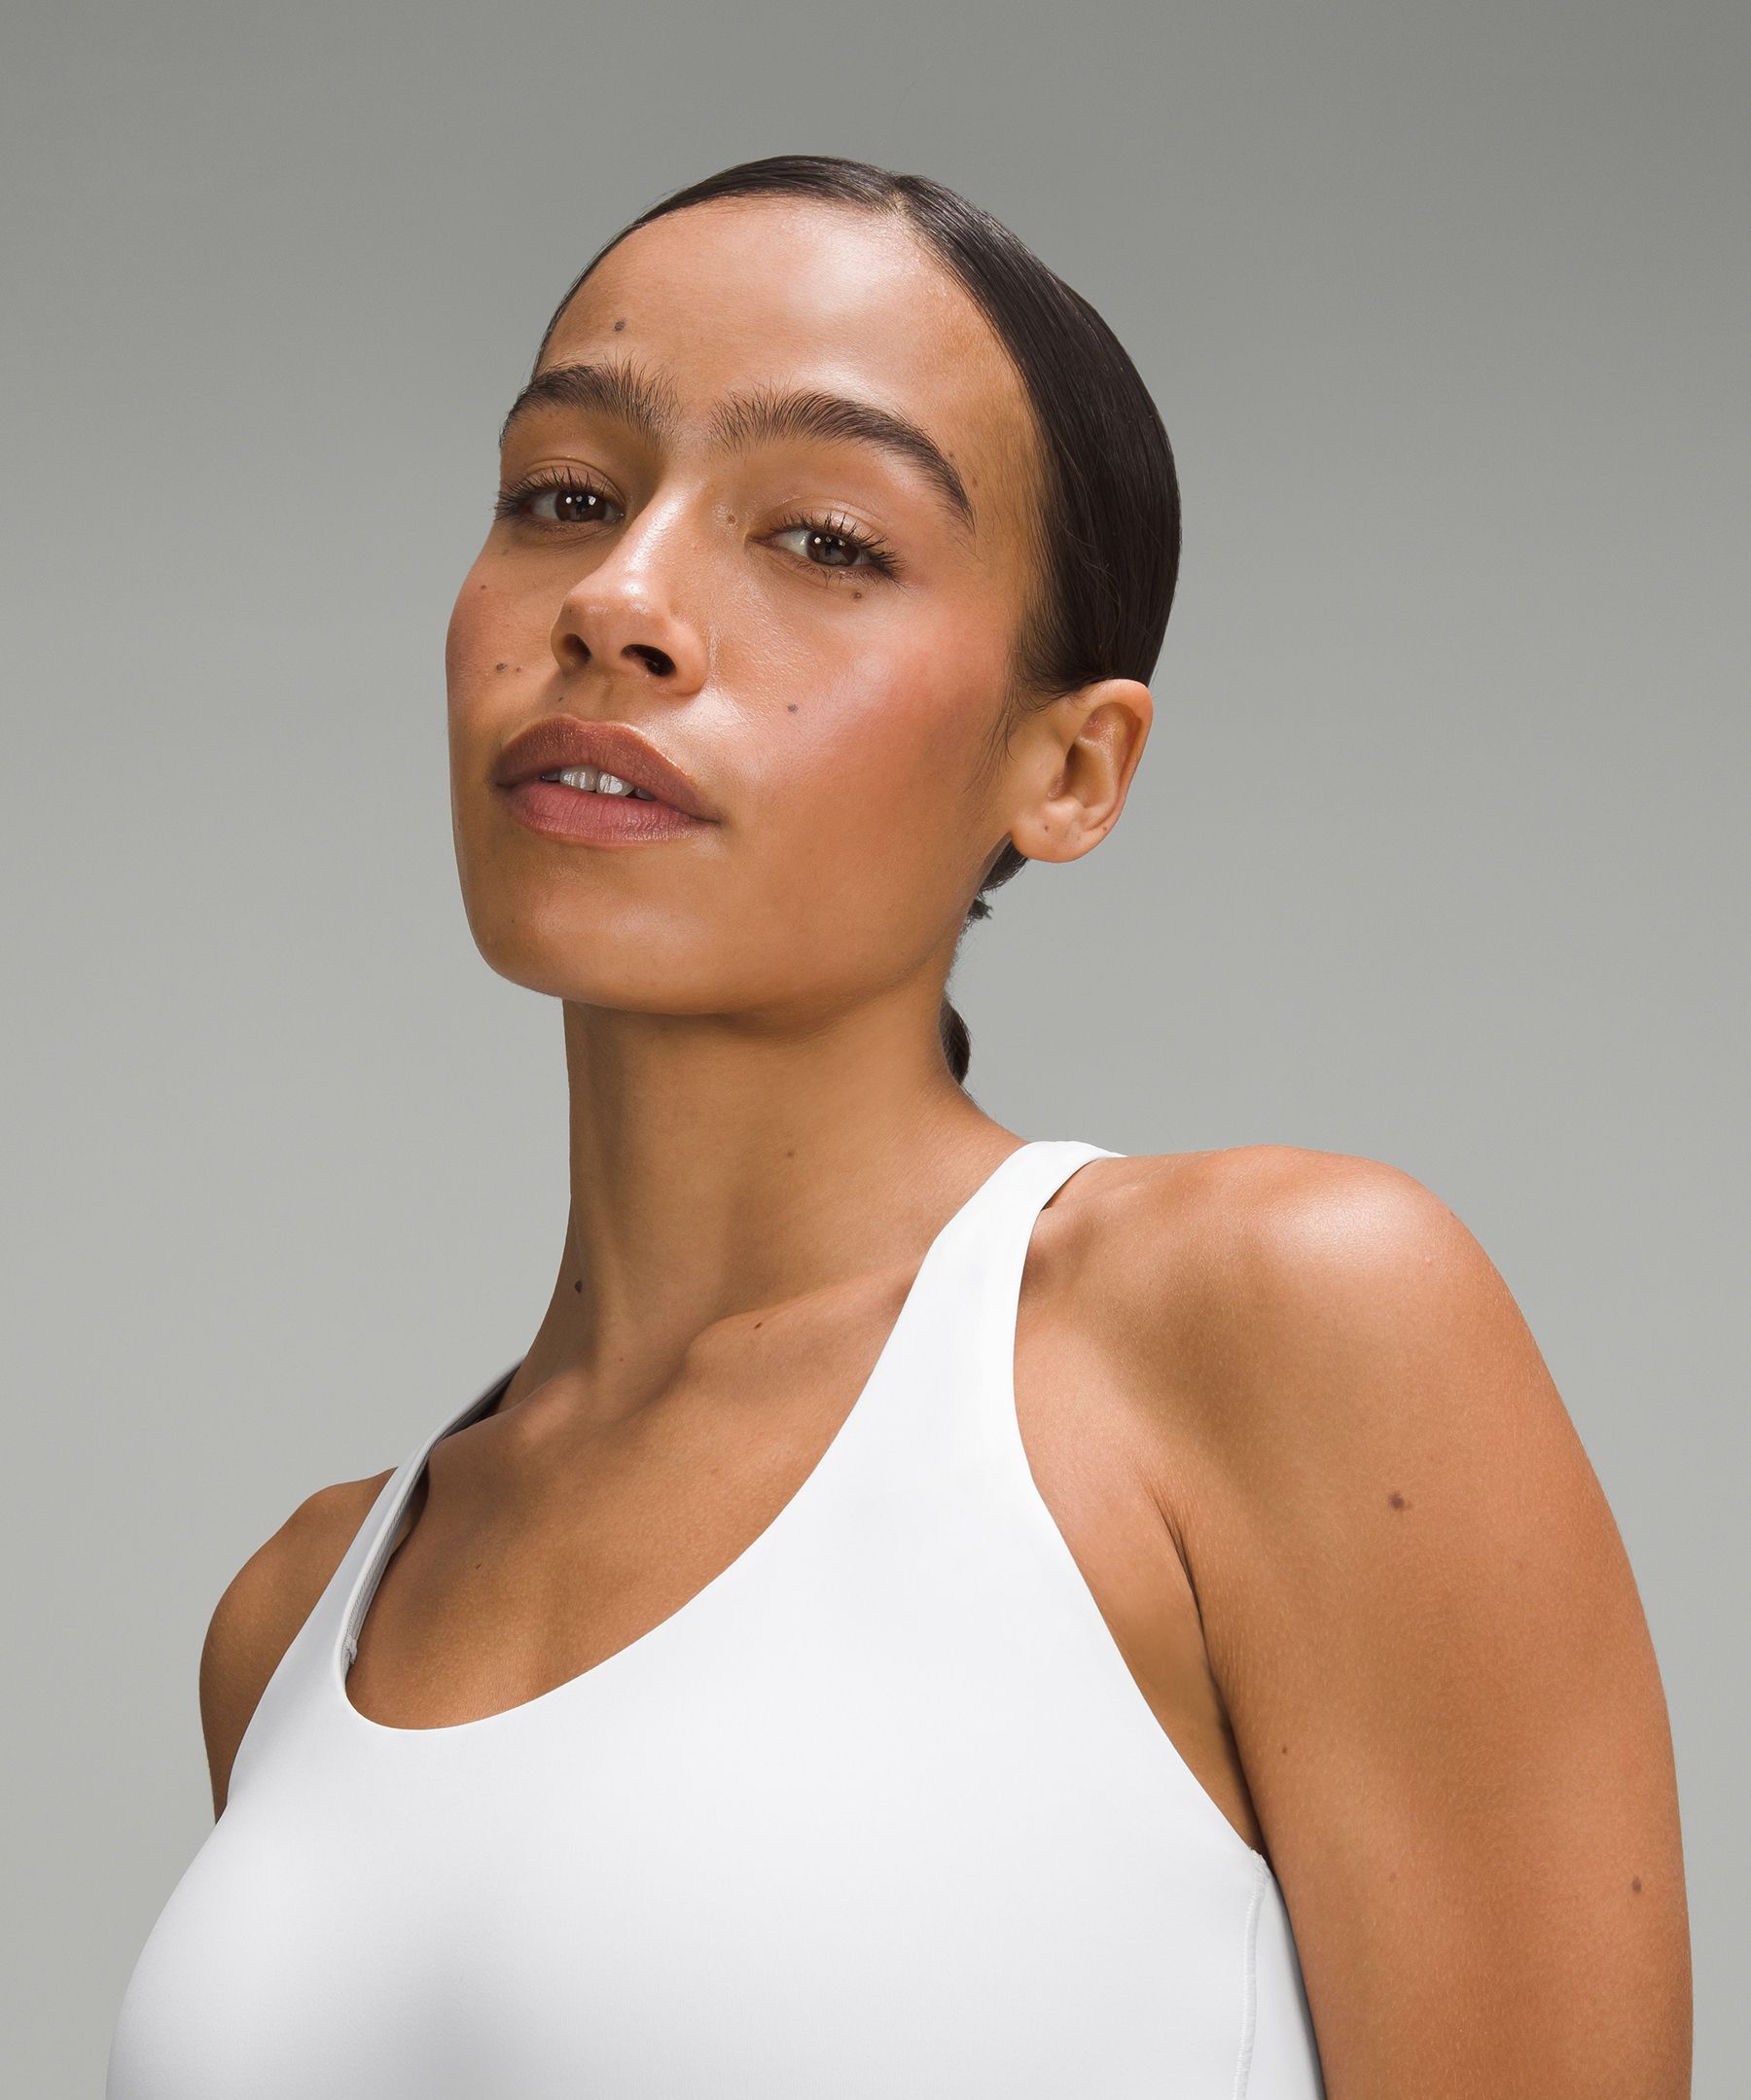 Lululemon Womens Sports Bras Canada Shop - Up To 60% OFF Now